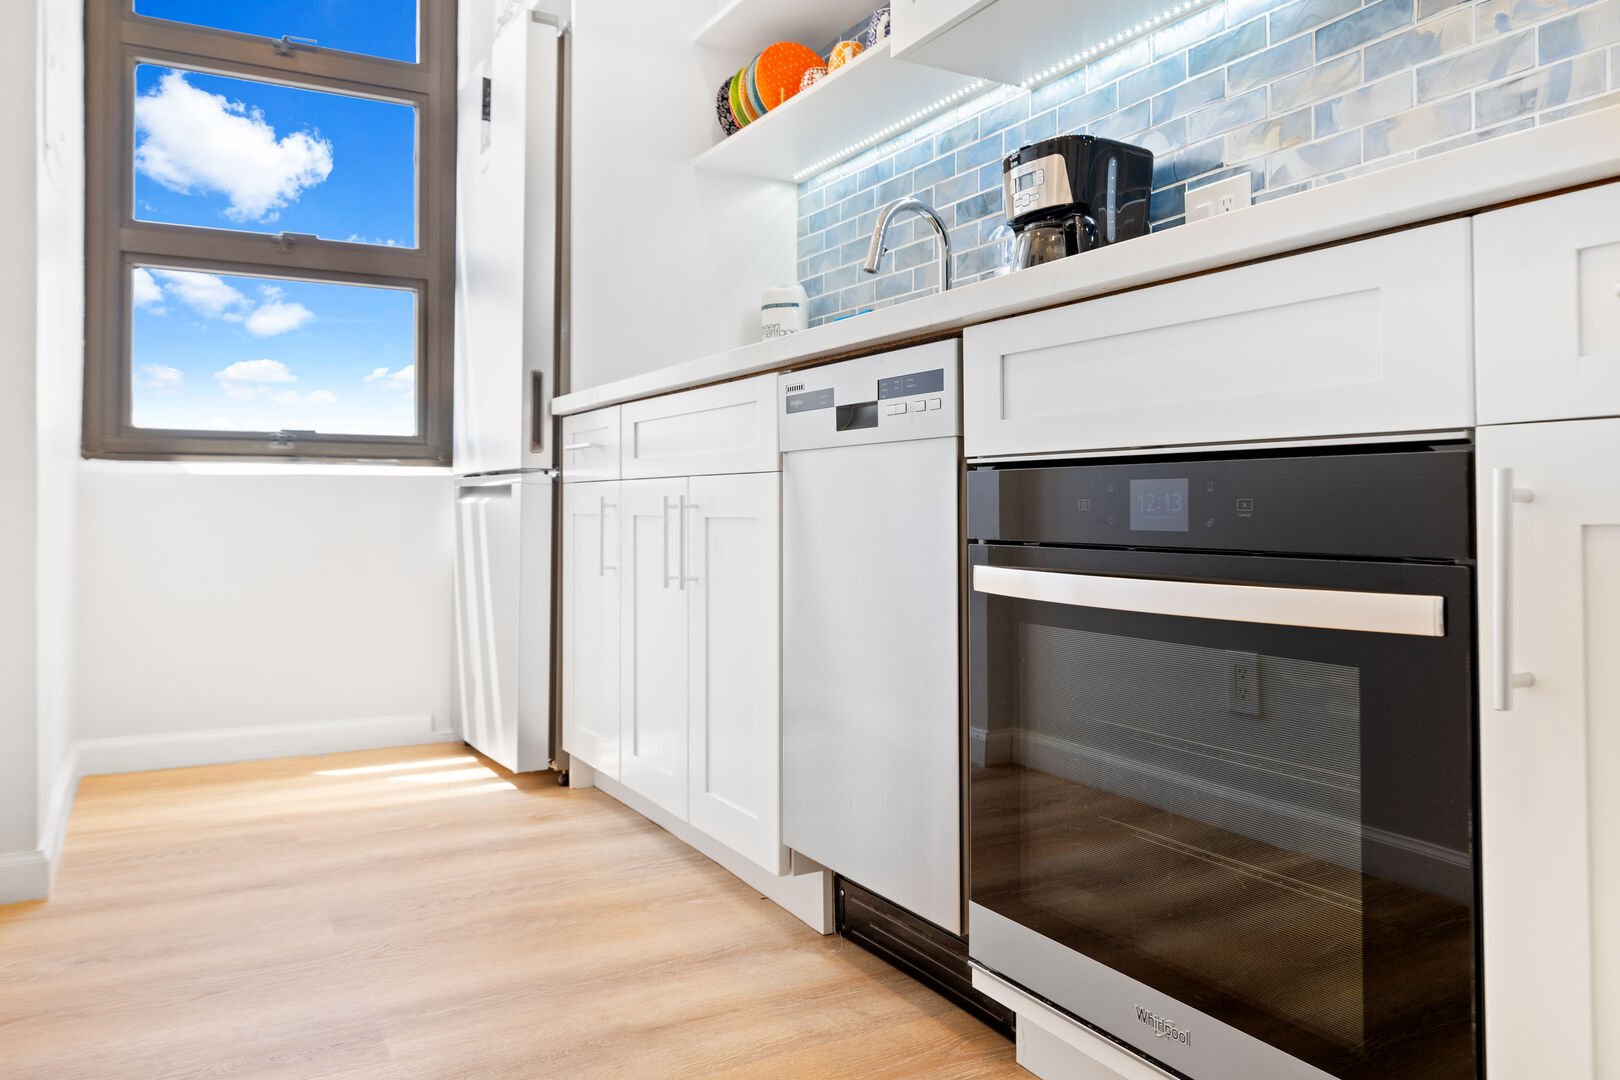 Enjoy making your favorite meals in this fully equipped kitchen plus, enjoy the view from your window!